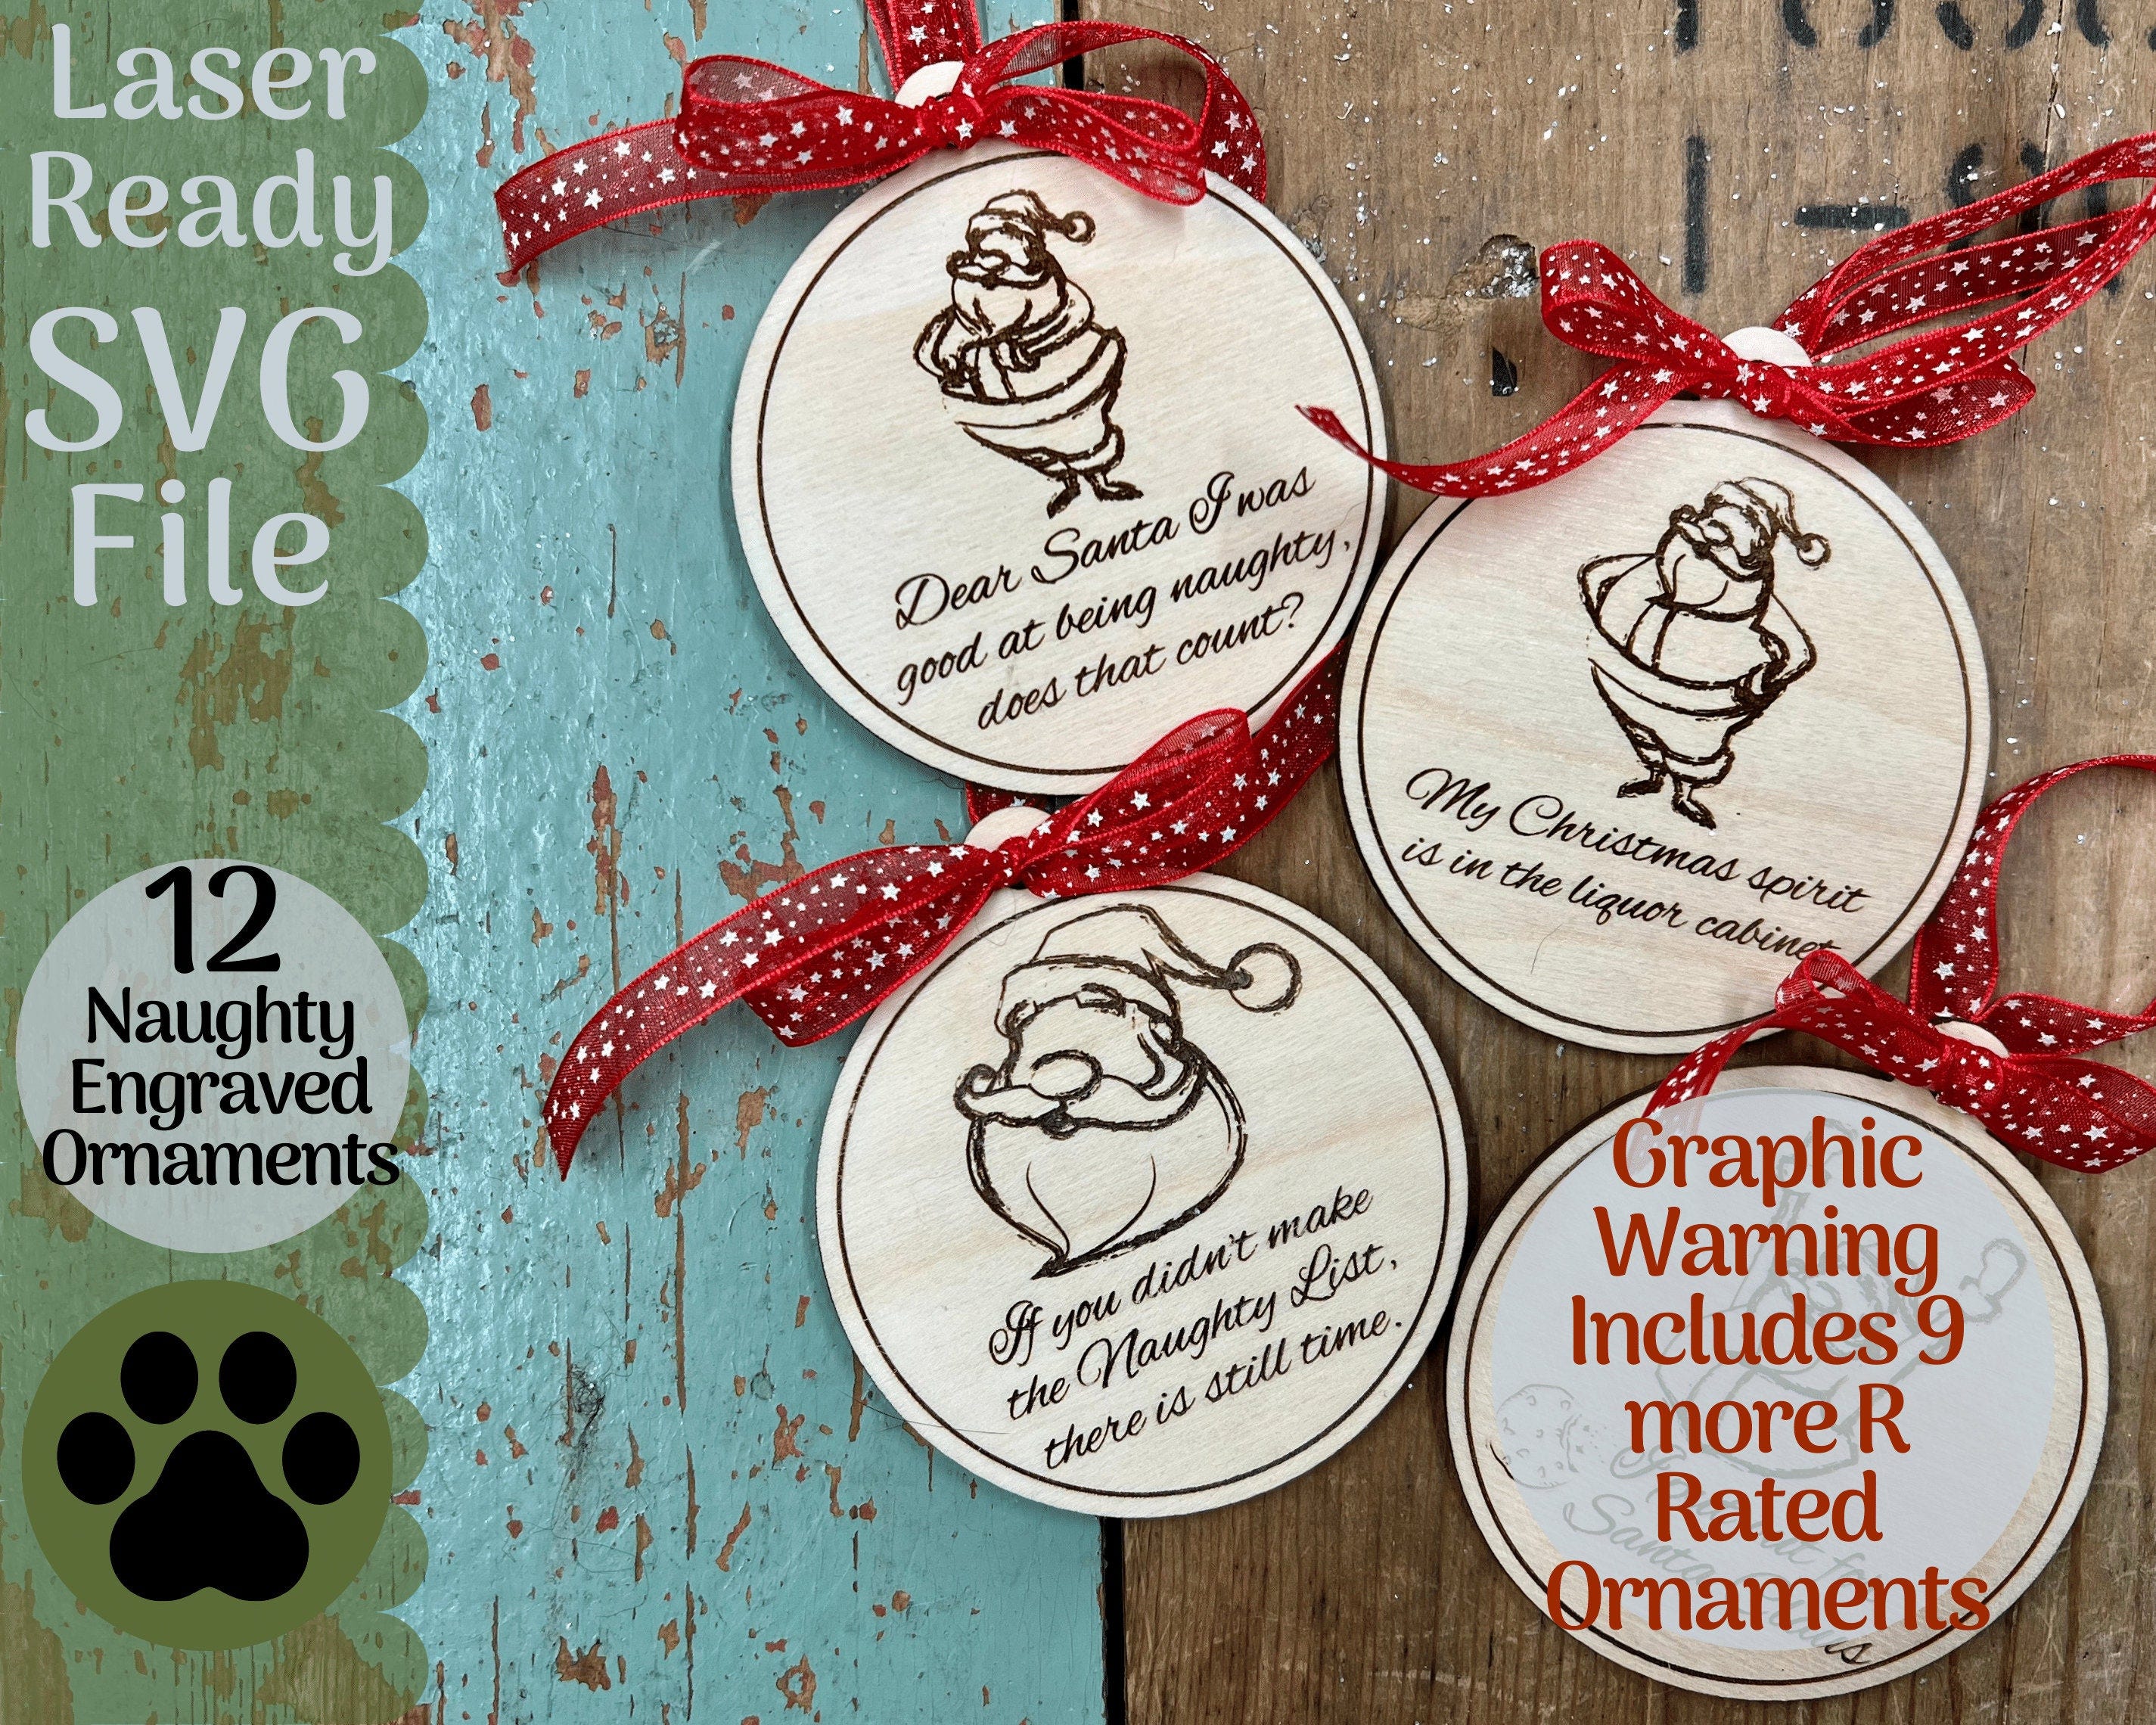 12 Naughty Christmas Ornament Bundle SVG File for Laser Cutters, Glowforge Ready Ornament, Easy Funny Engrave and Cut, Mature Humor Ornament